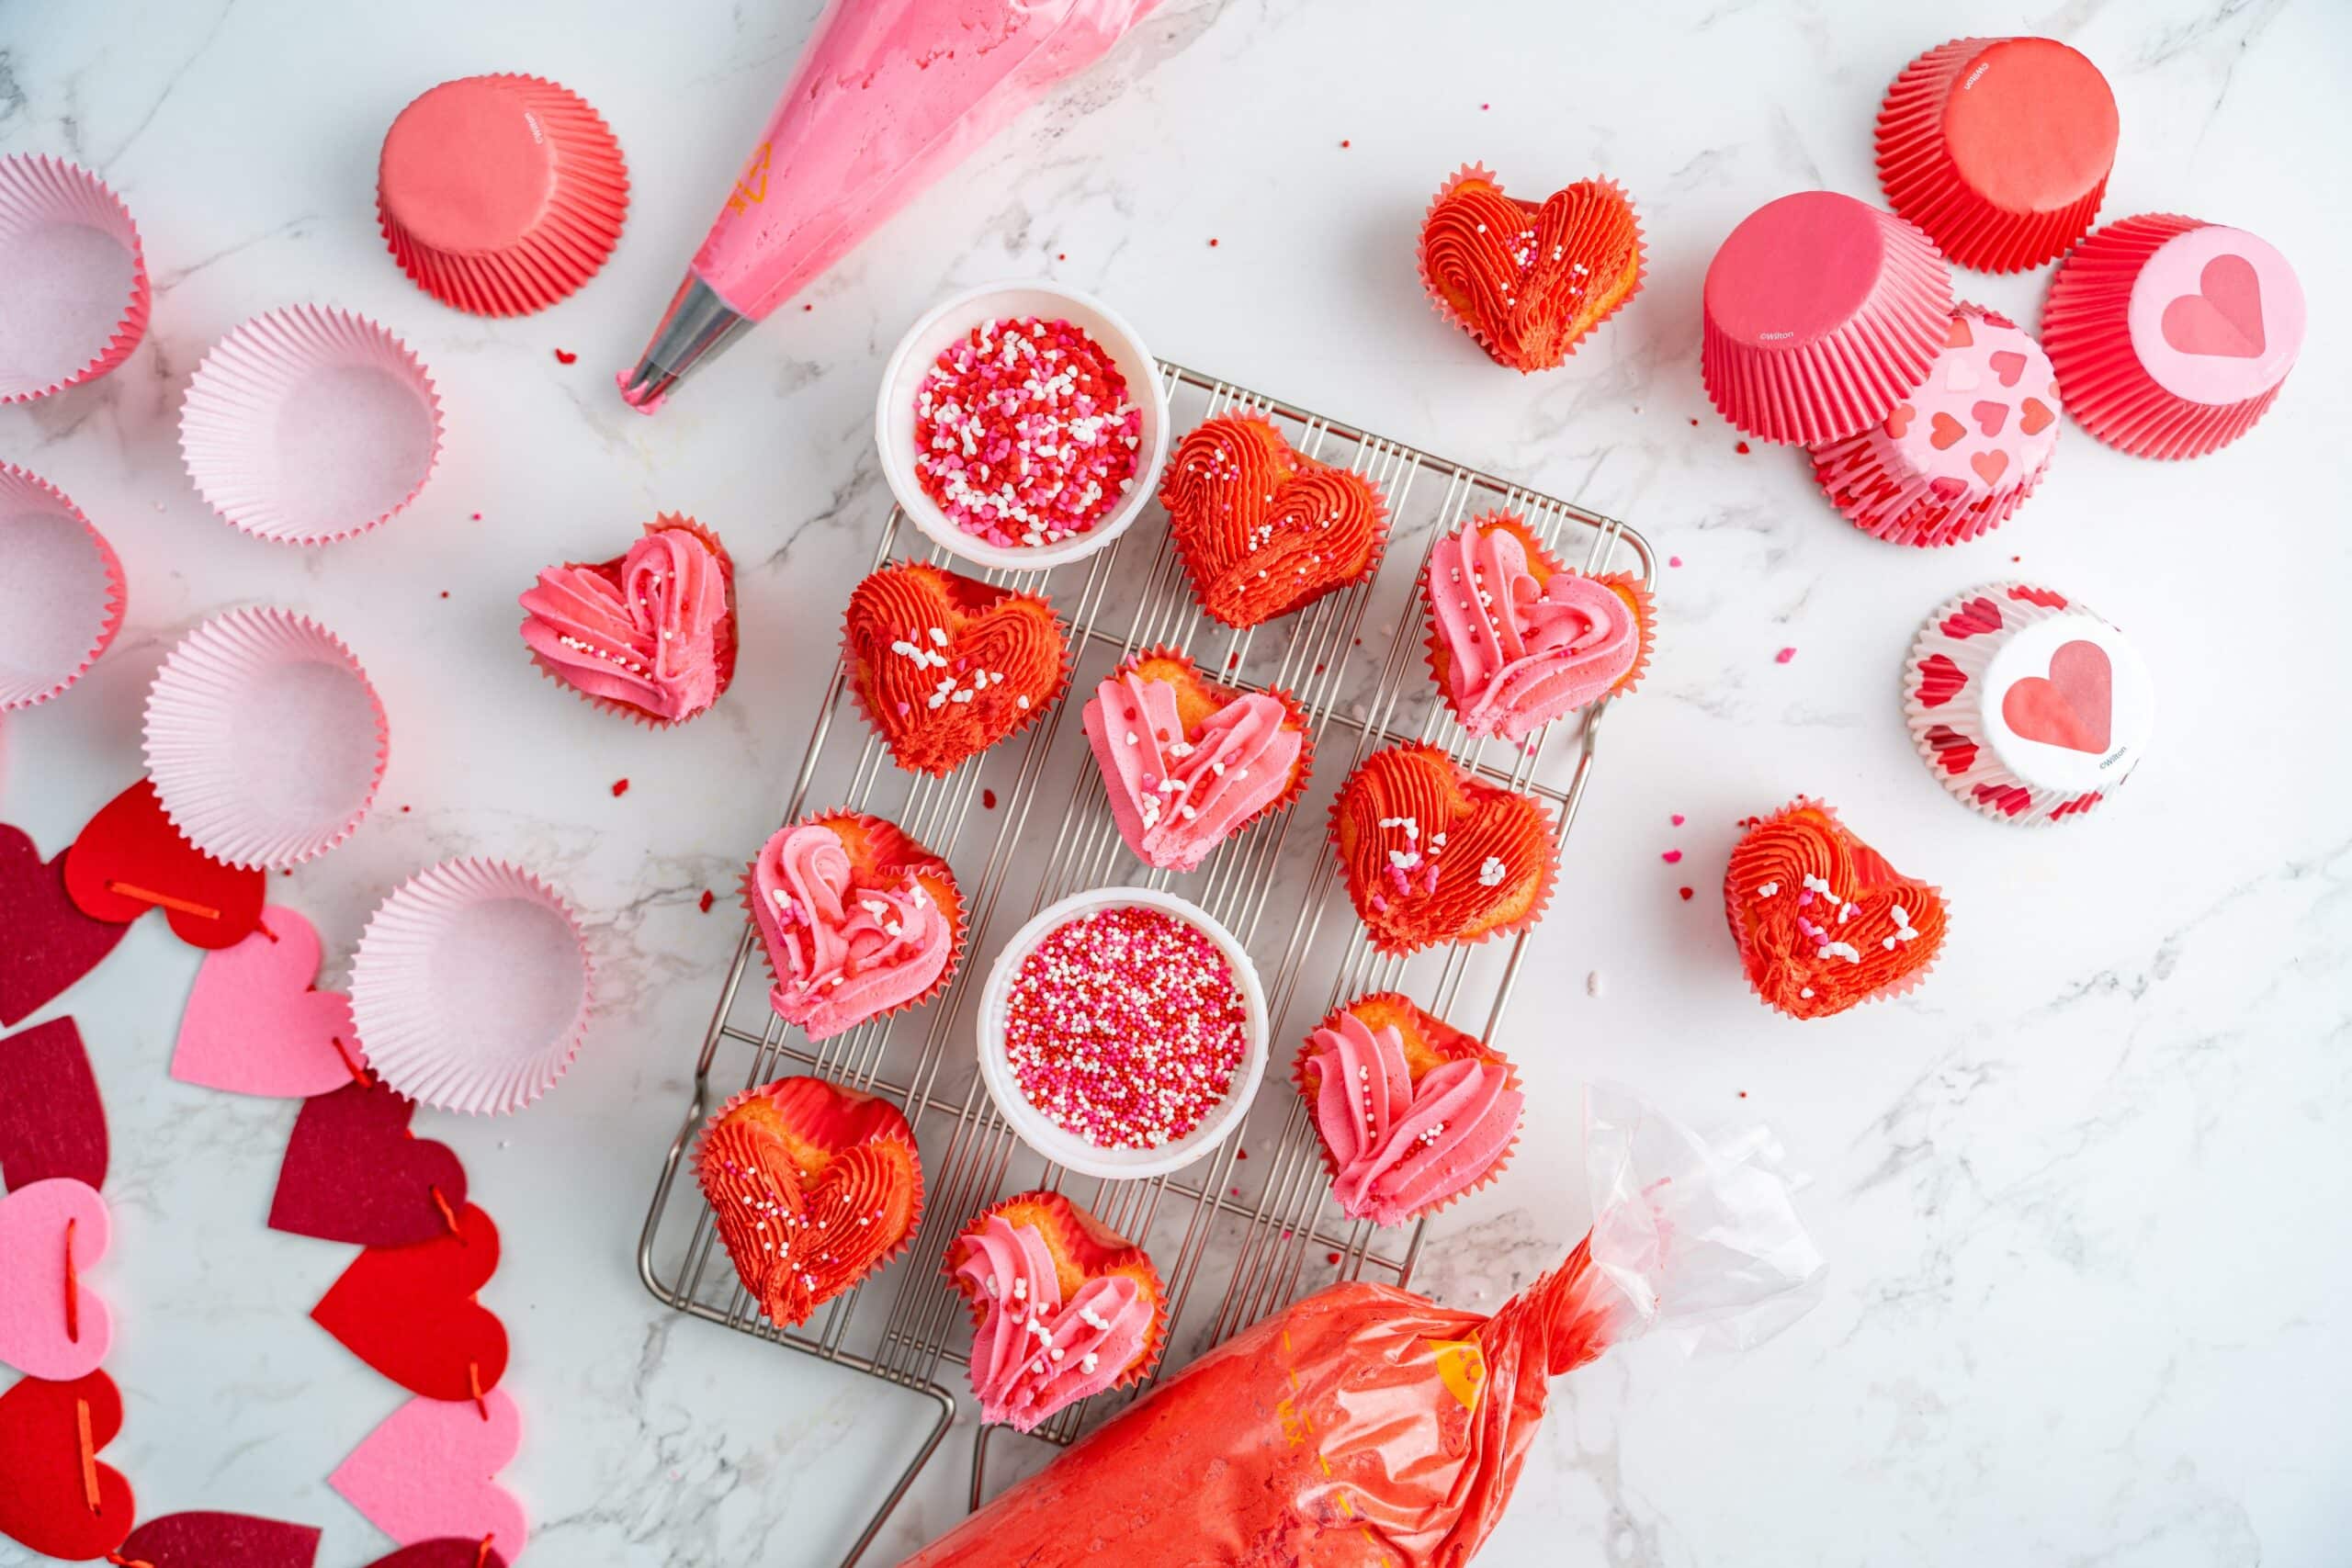 Valentine's Day cupcake decorations: heart shaped cupcakes